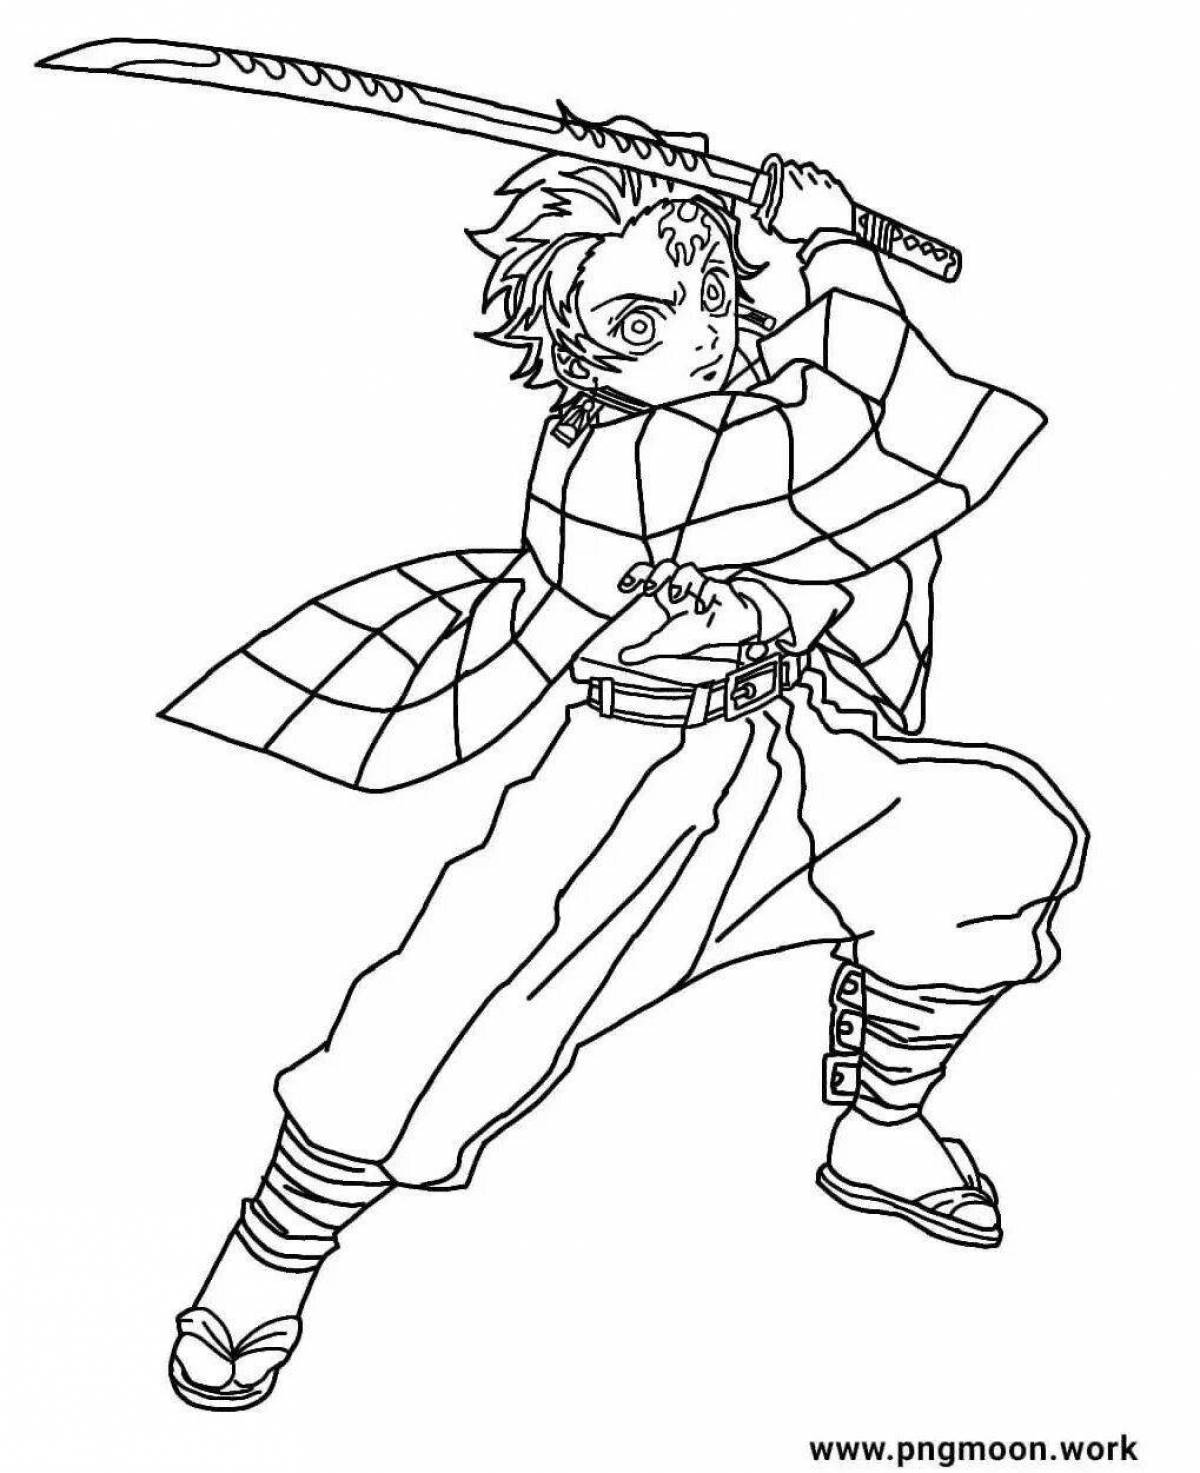 Monster Killer Coloring Page